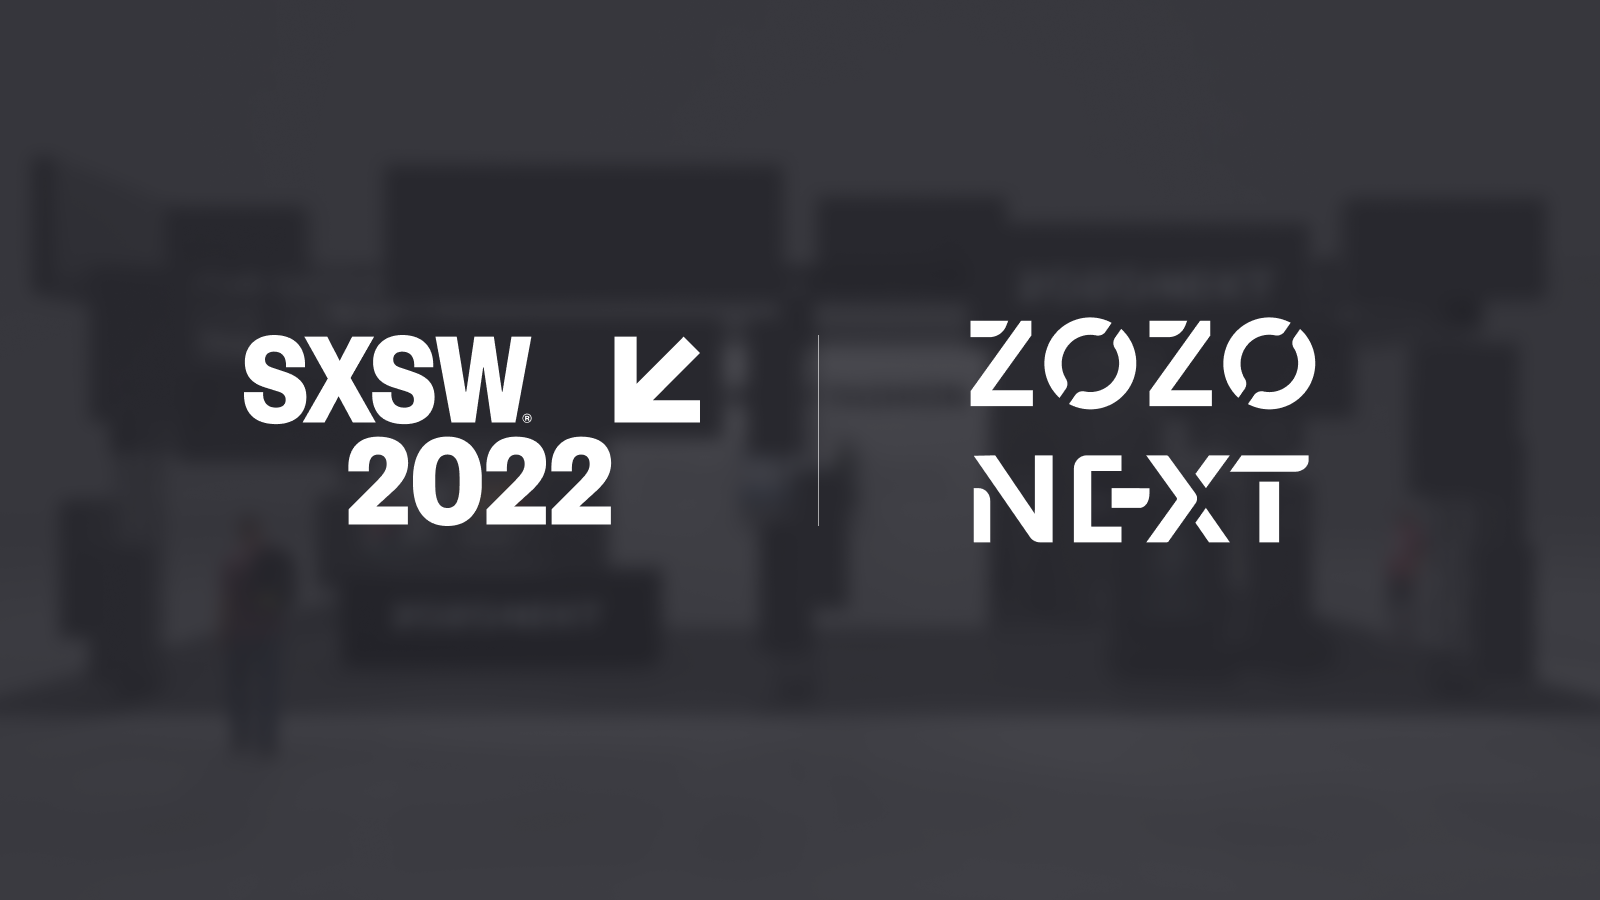 ZOZO NEXT’s First Exhibit at World-Leading Technology and Culture Festival "SXSW 2022"